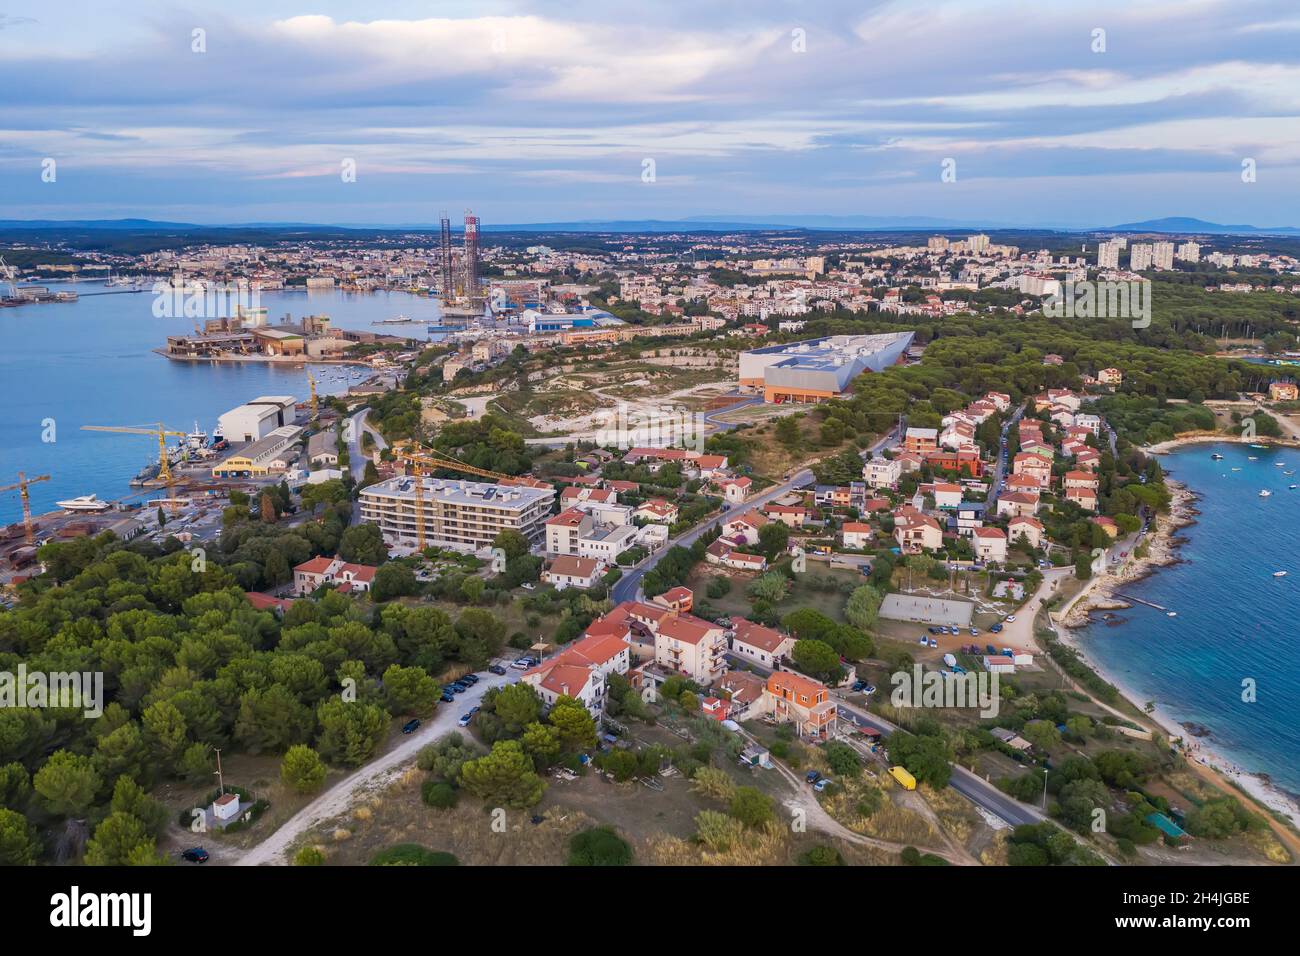 an aerial view of of Pula from Stoja peninsula, industry area on left side, Pula, Istria, Croatia Stock Photo